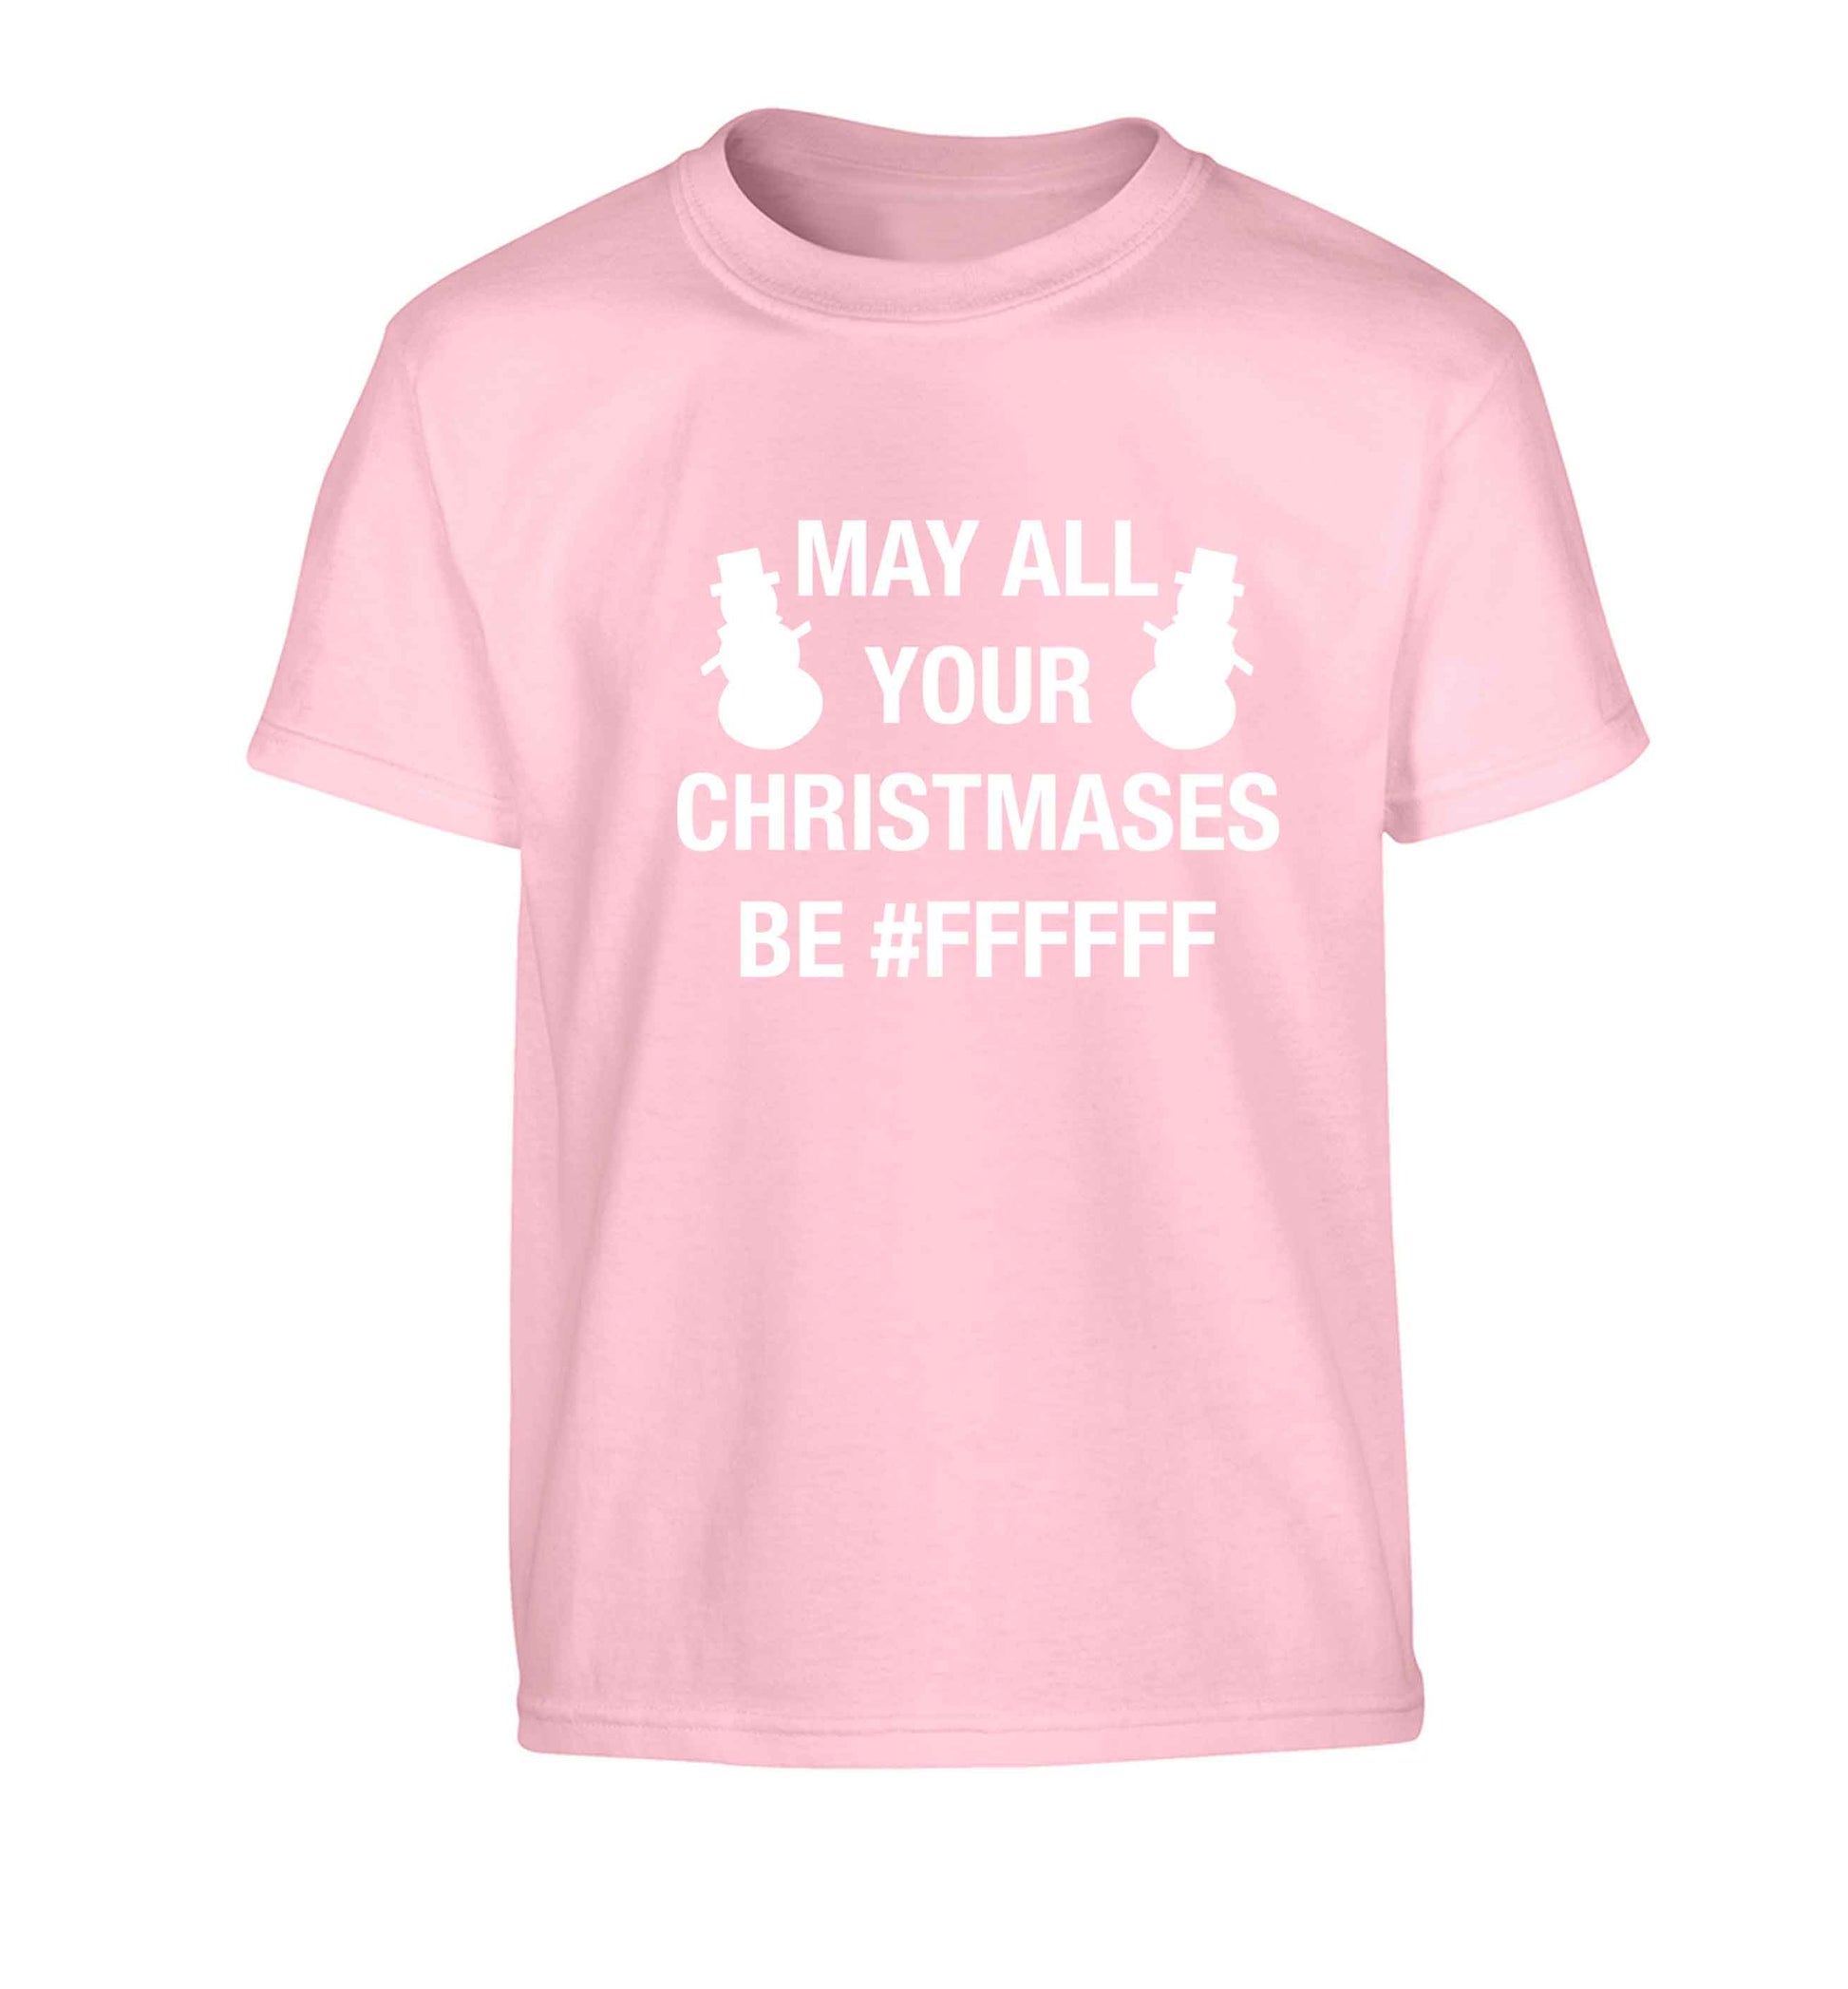 May all your Christmases be #FFFFFF Children's light pink Tshirt 12-13 Years